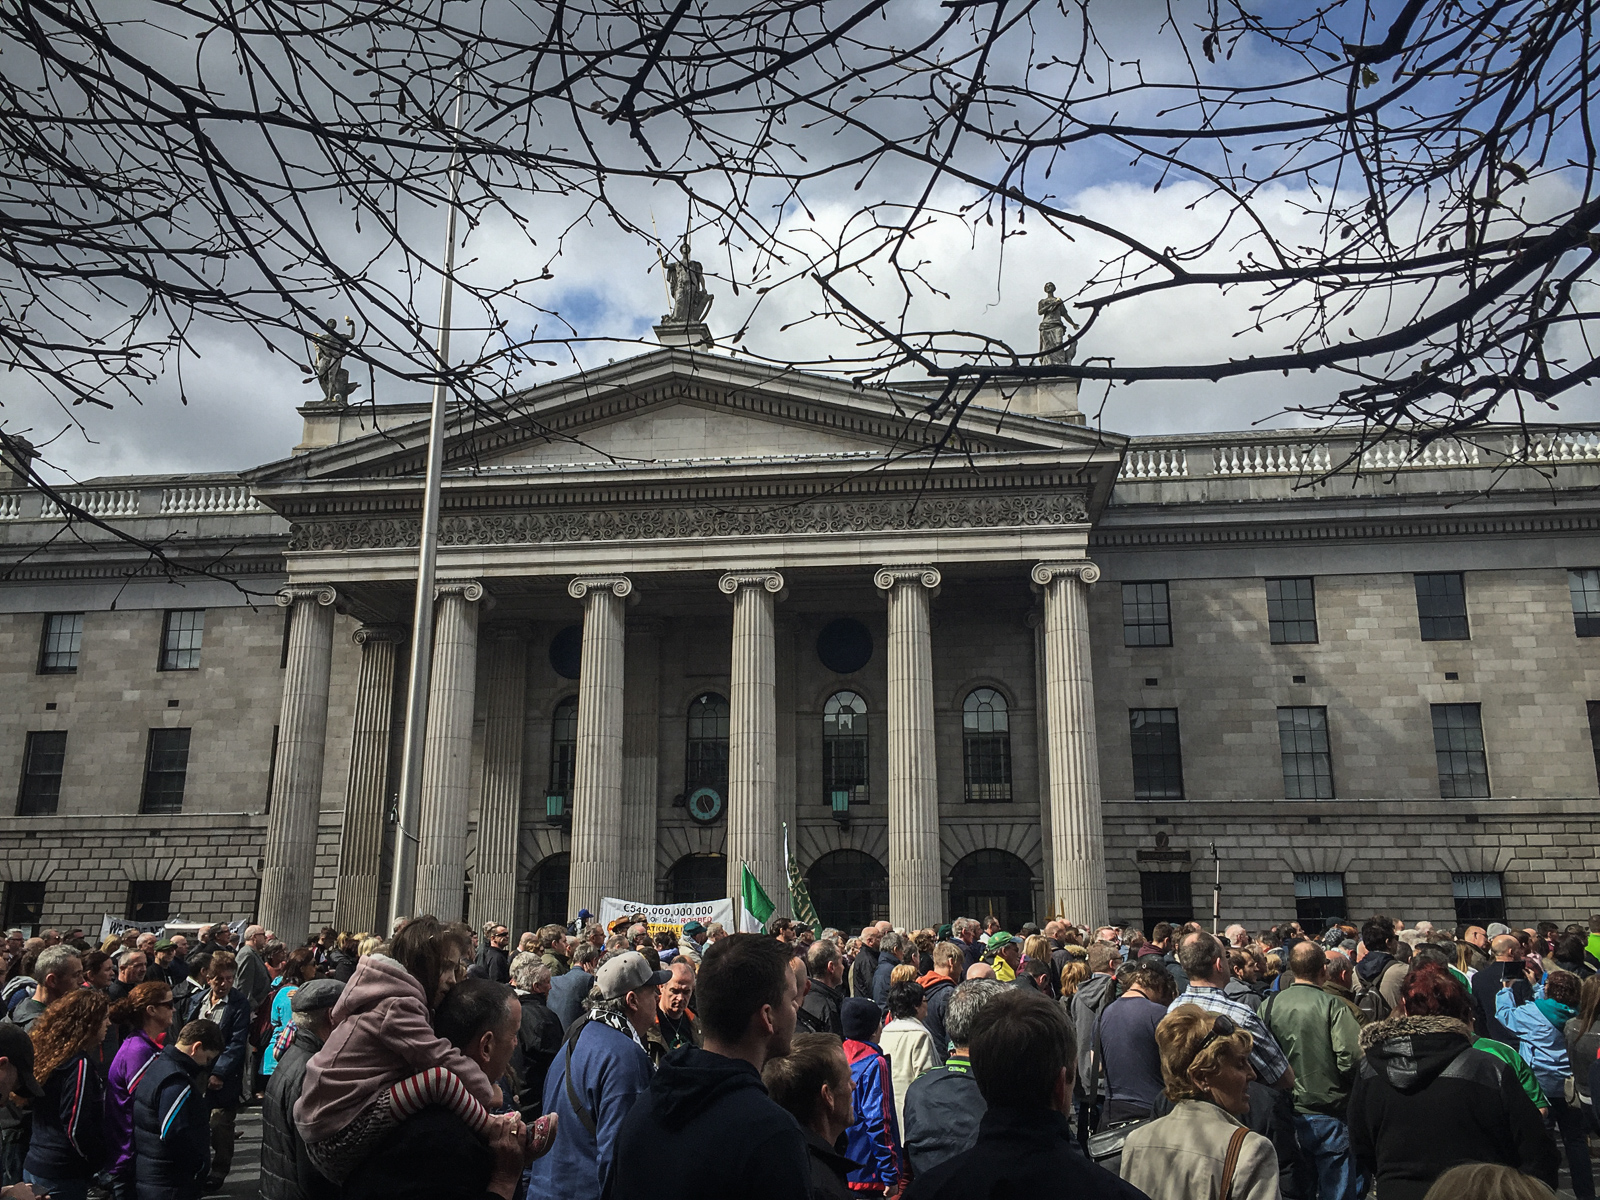 photos iphone easter rising photographer donal kelly